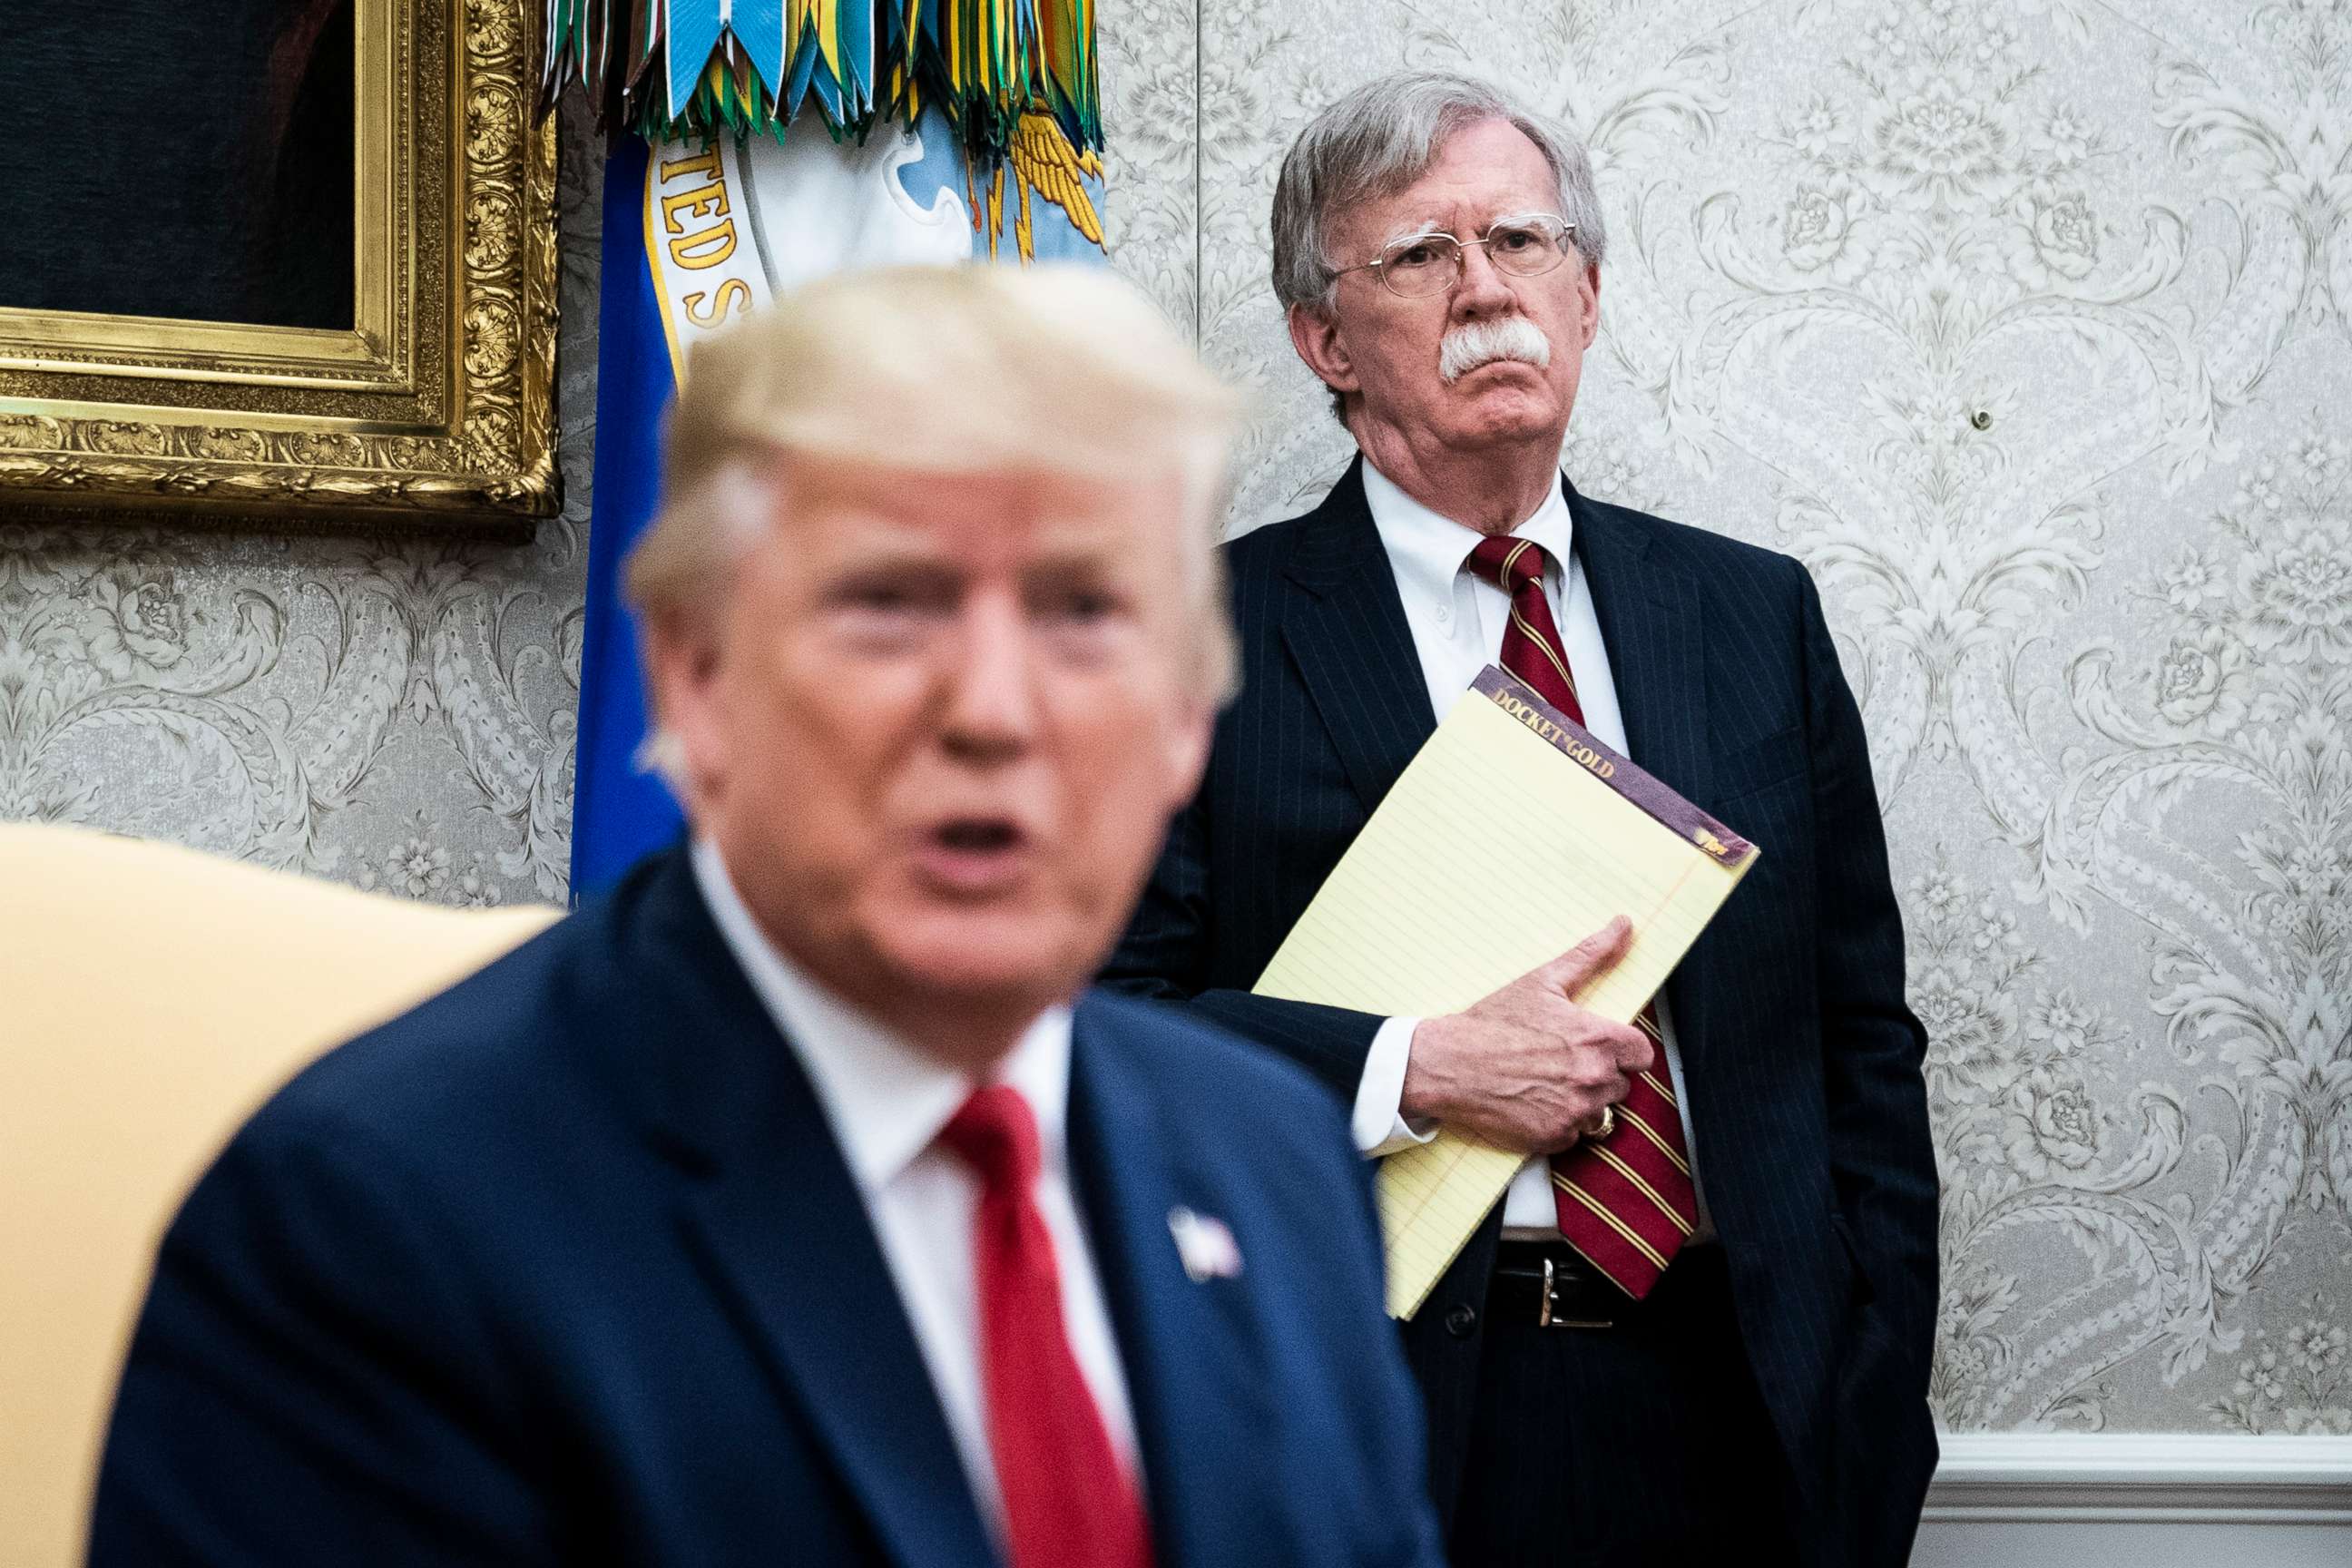 PHOTO: National Security Advisor John R. Bolton listens as President Donald J. Trump meets with Prime Minister of the Netherlands Mark Rutte in the Oval Office at the White House, July 18, 2019.